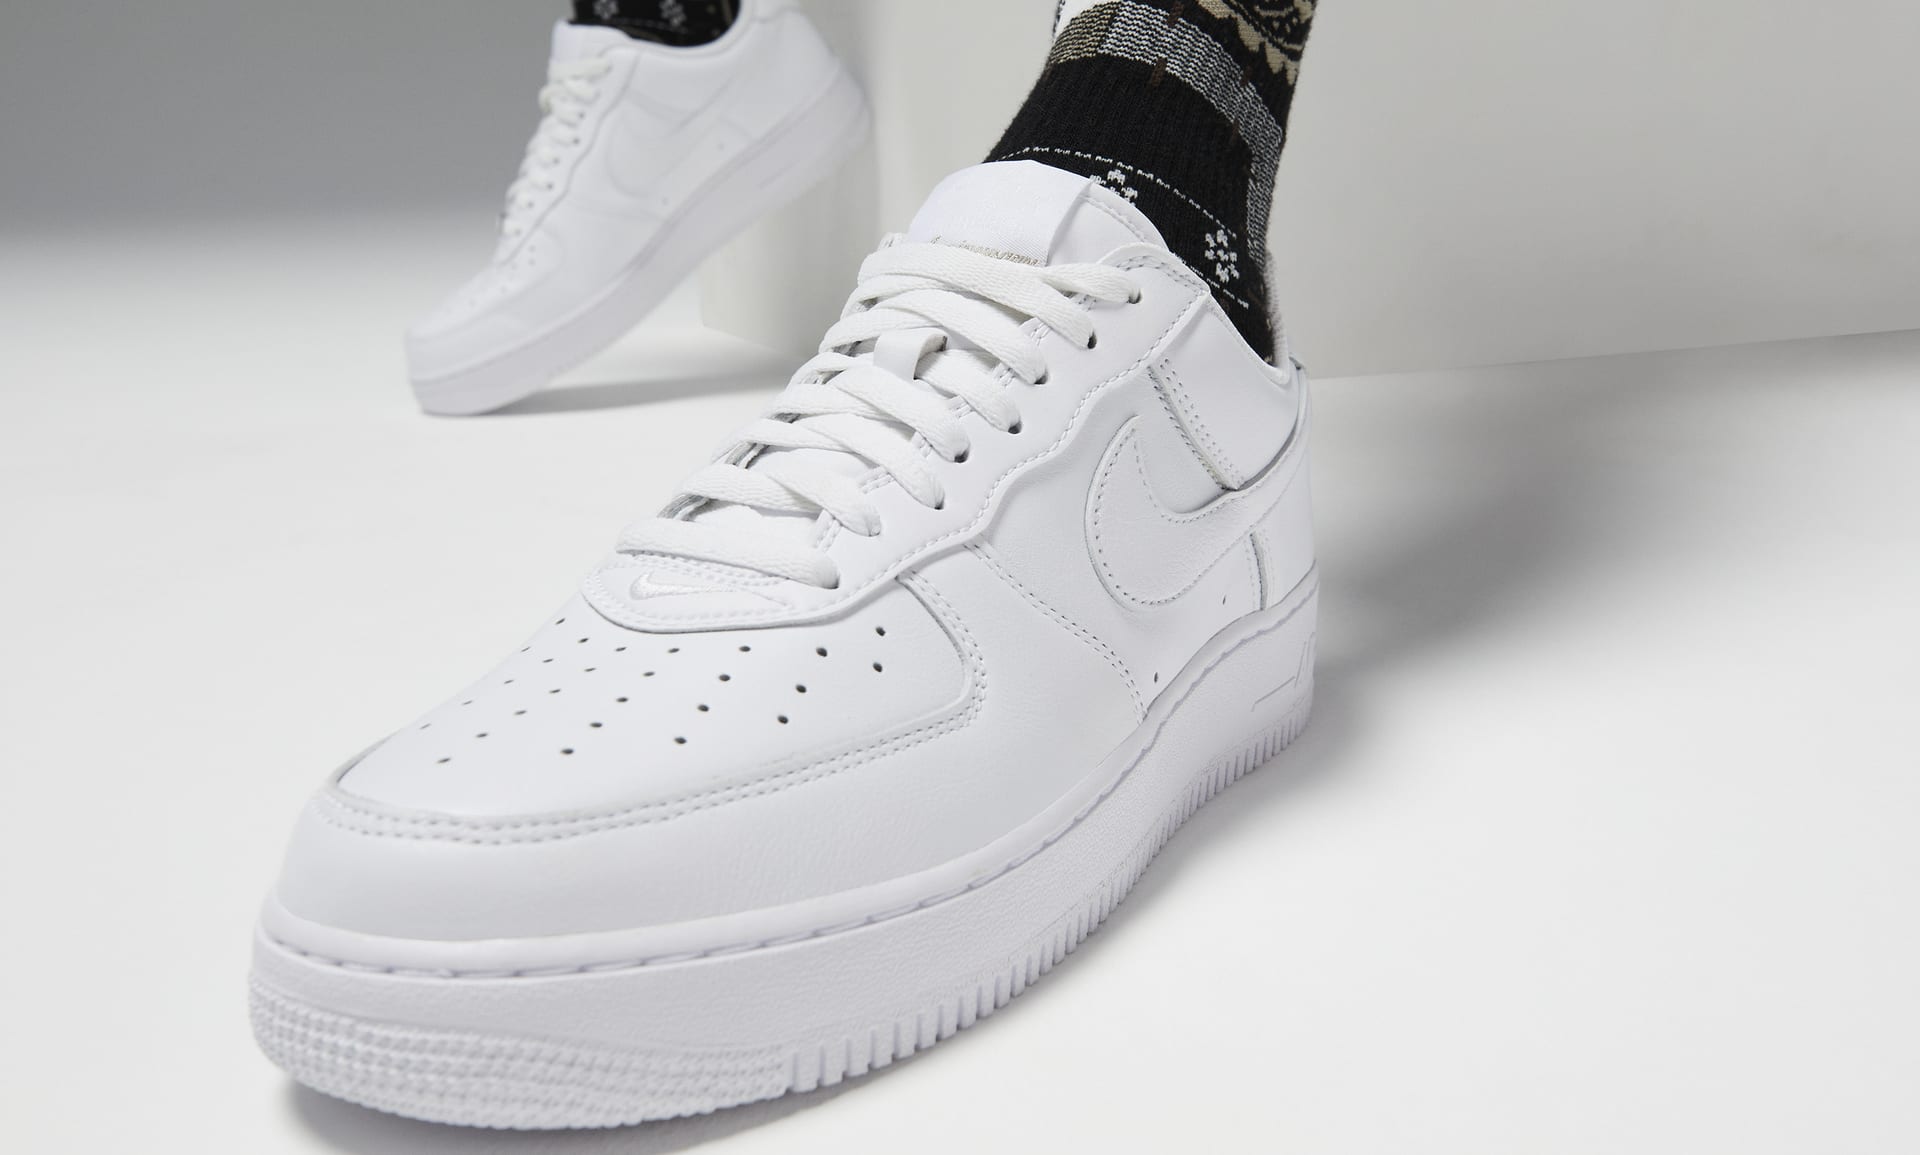 Abstraction Discourage smuggling Nike Air Force 1 Low By You Custom Men's Shoes. Nike.com